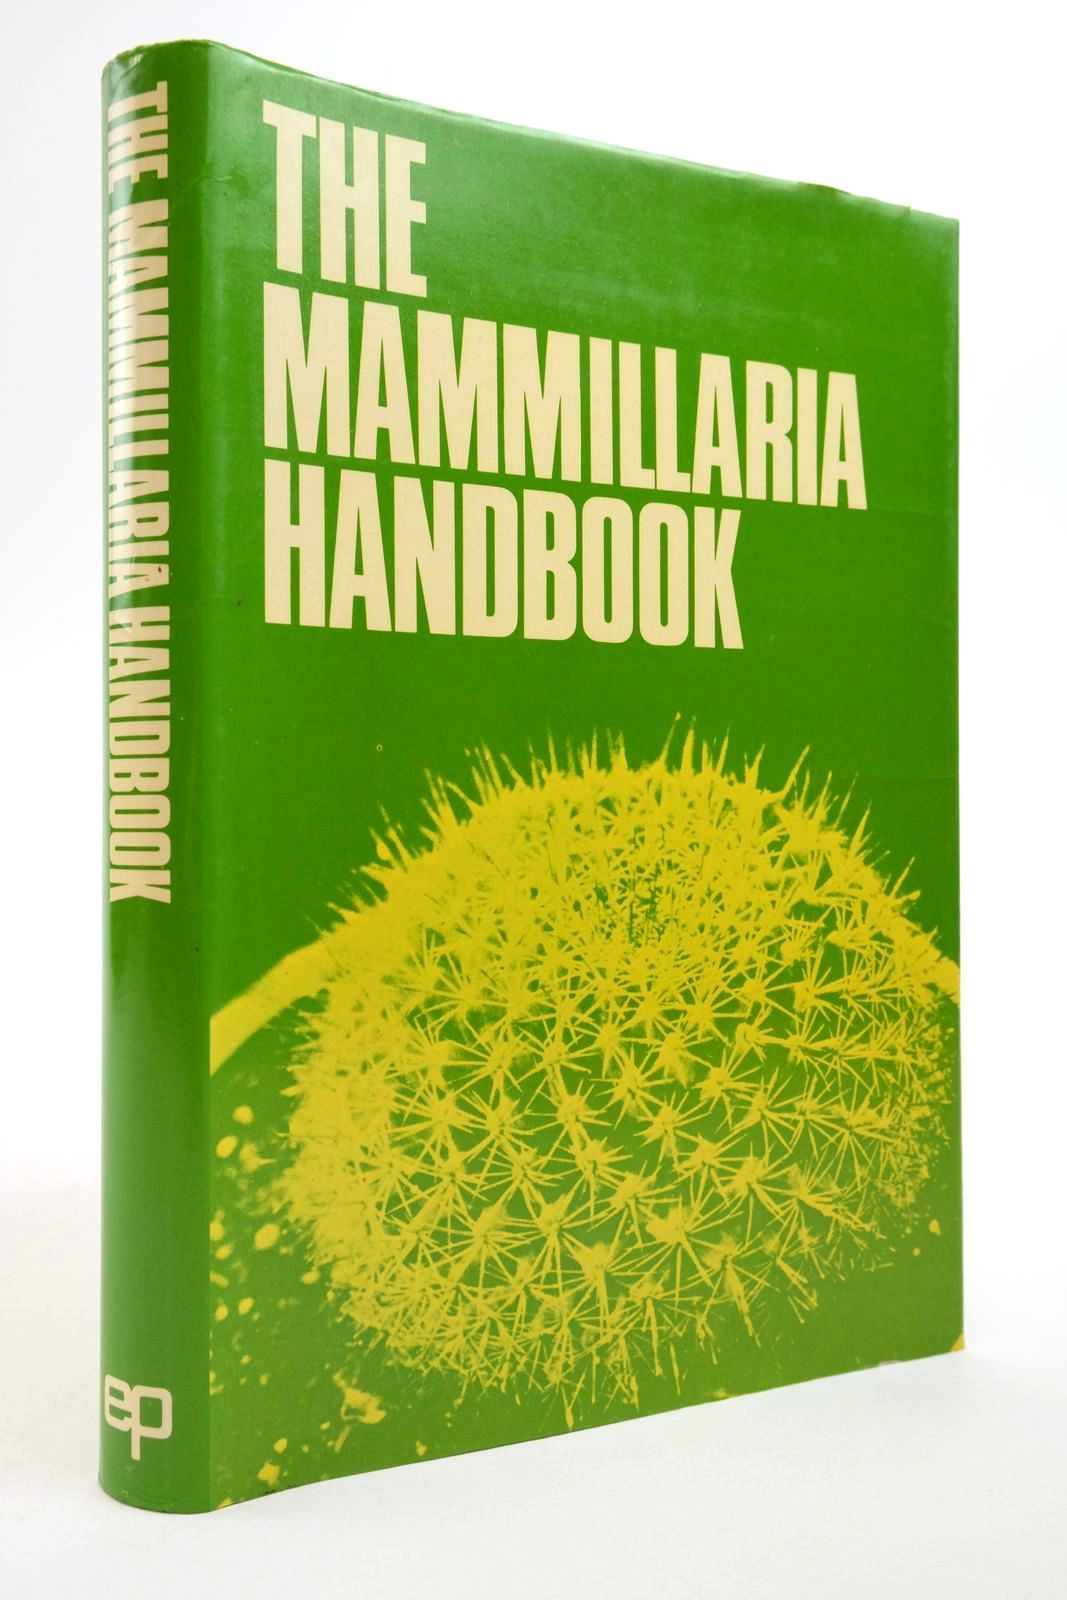 Photo of THE MAMMILLARIA HANDBOOK written by Craig, Robert T. published by EP Publishing Limited (STOCK CODE: 1823719)  for sale by Stella & Rose's Books